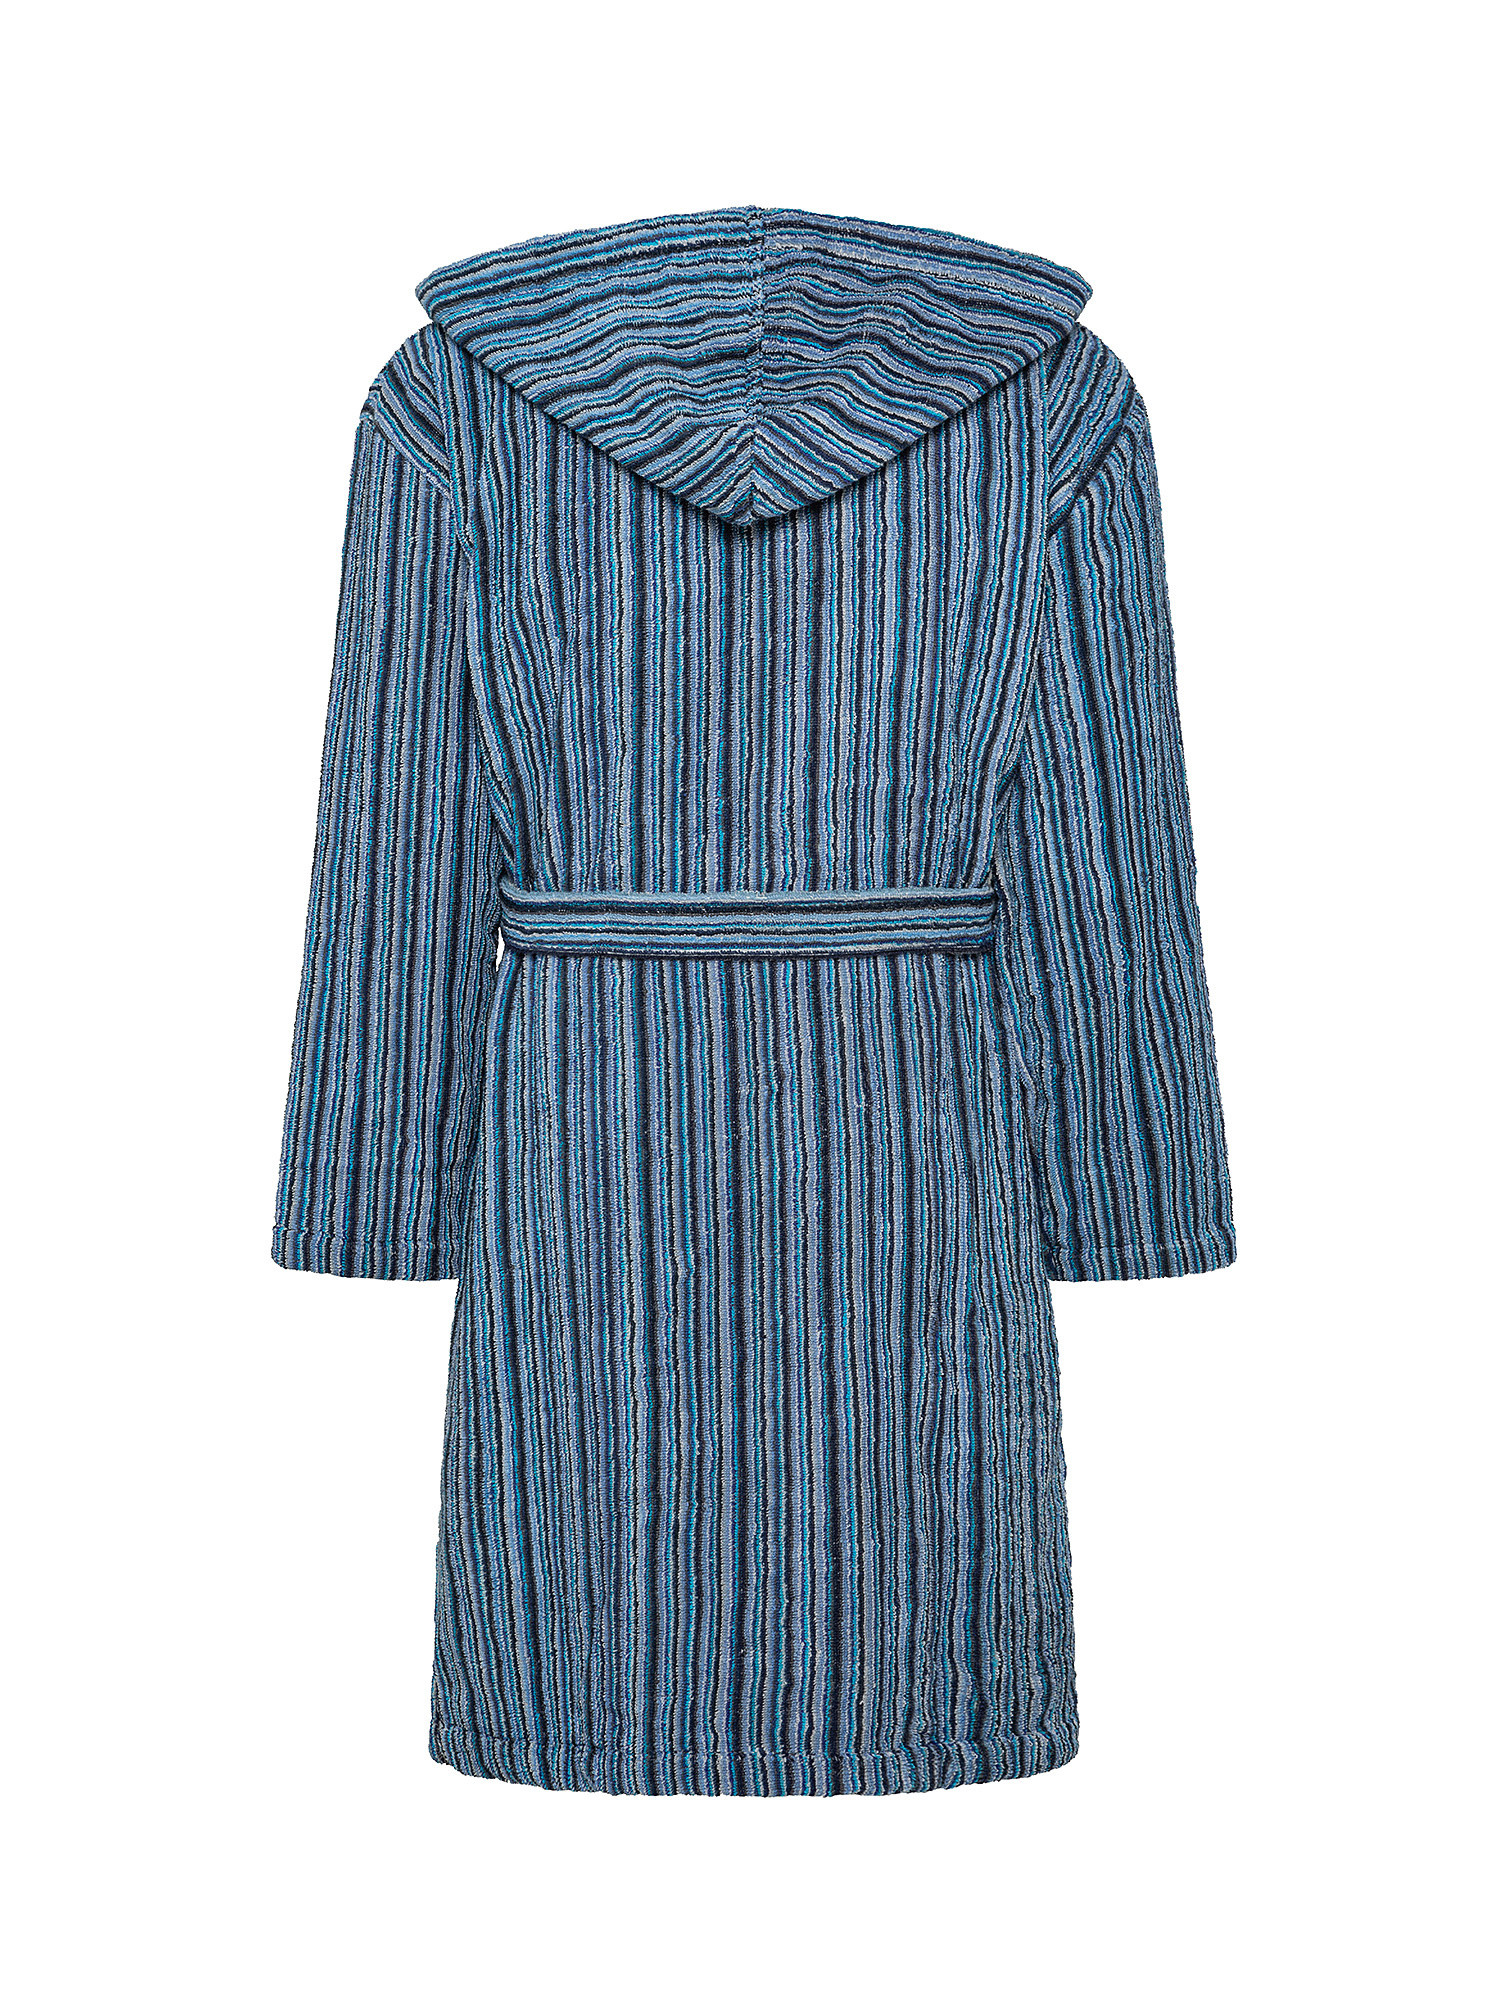 Striped cotton terry bathrobe, Blue, large image number 1